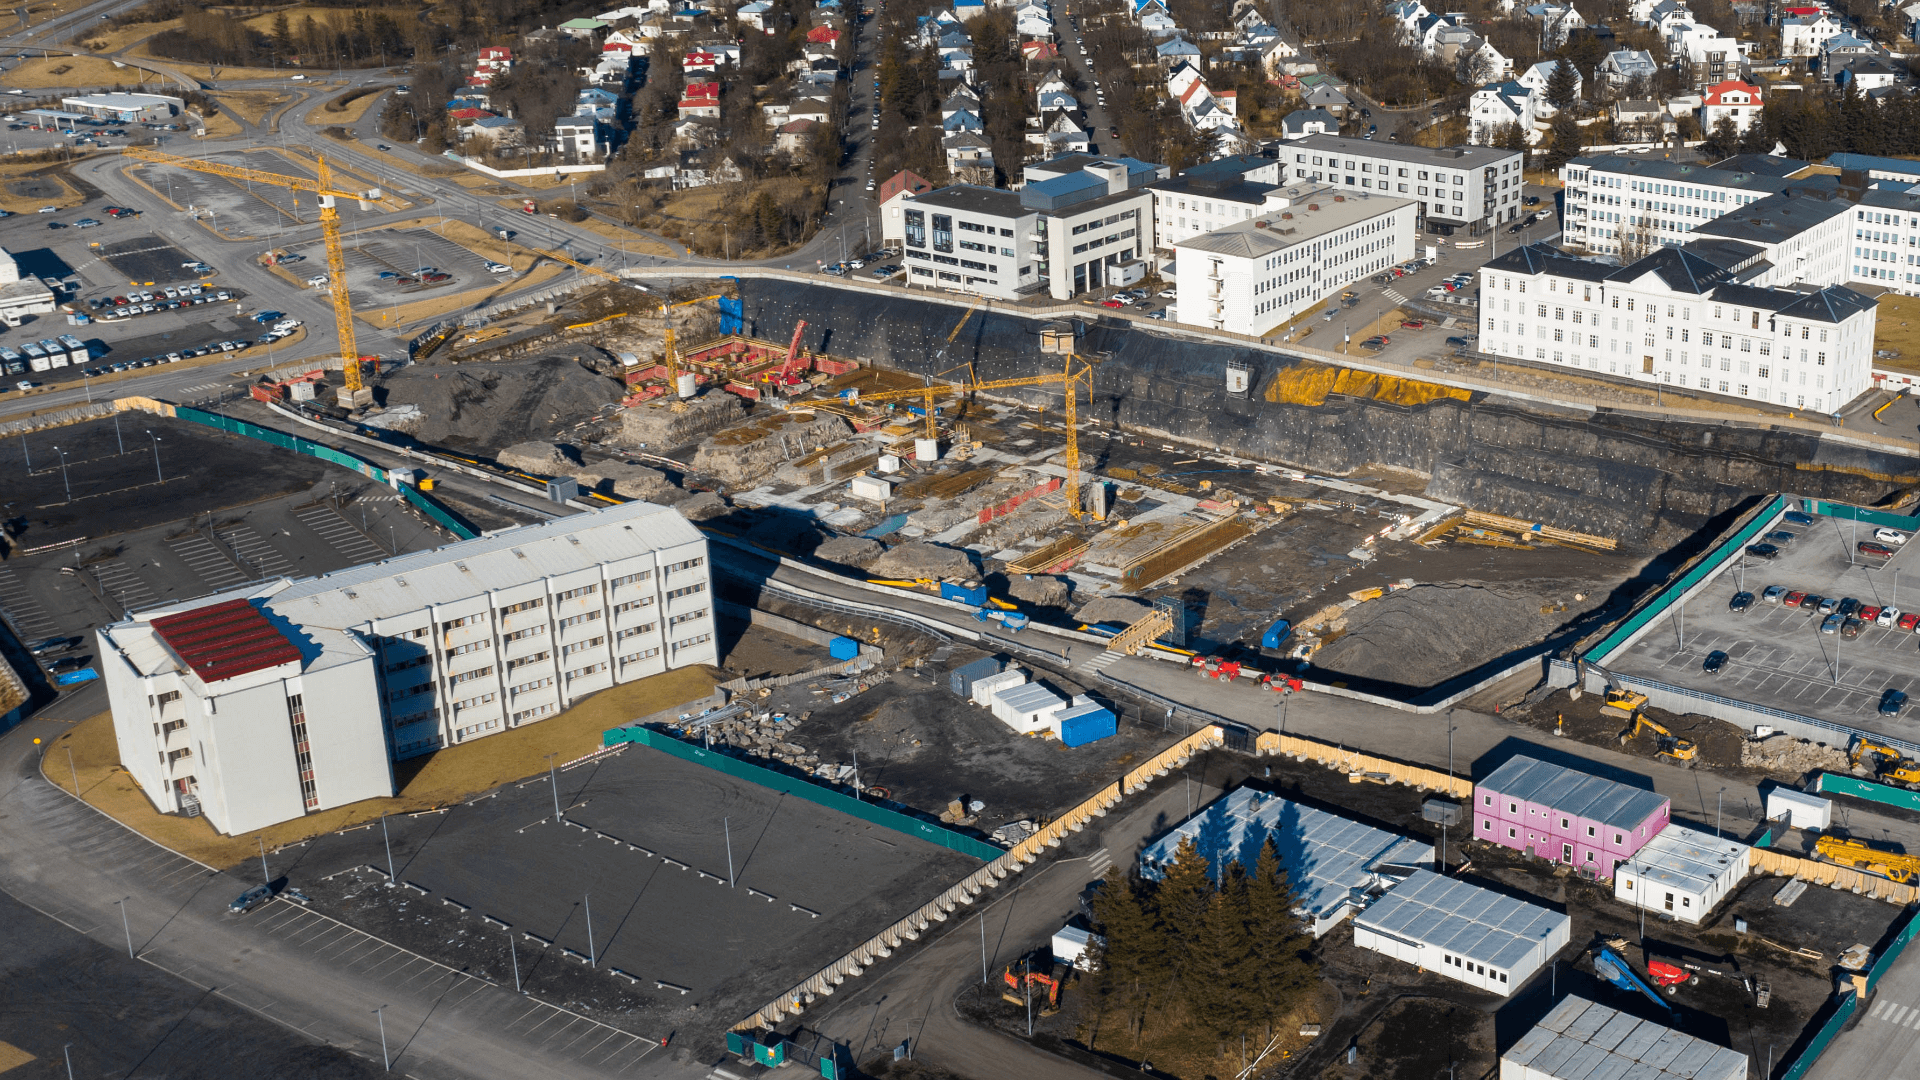 Aerial shot of a construction site